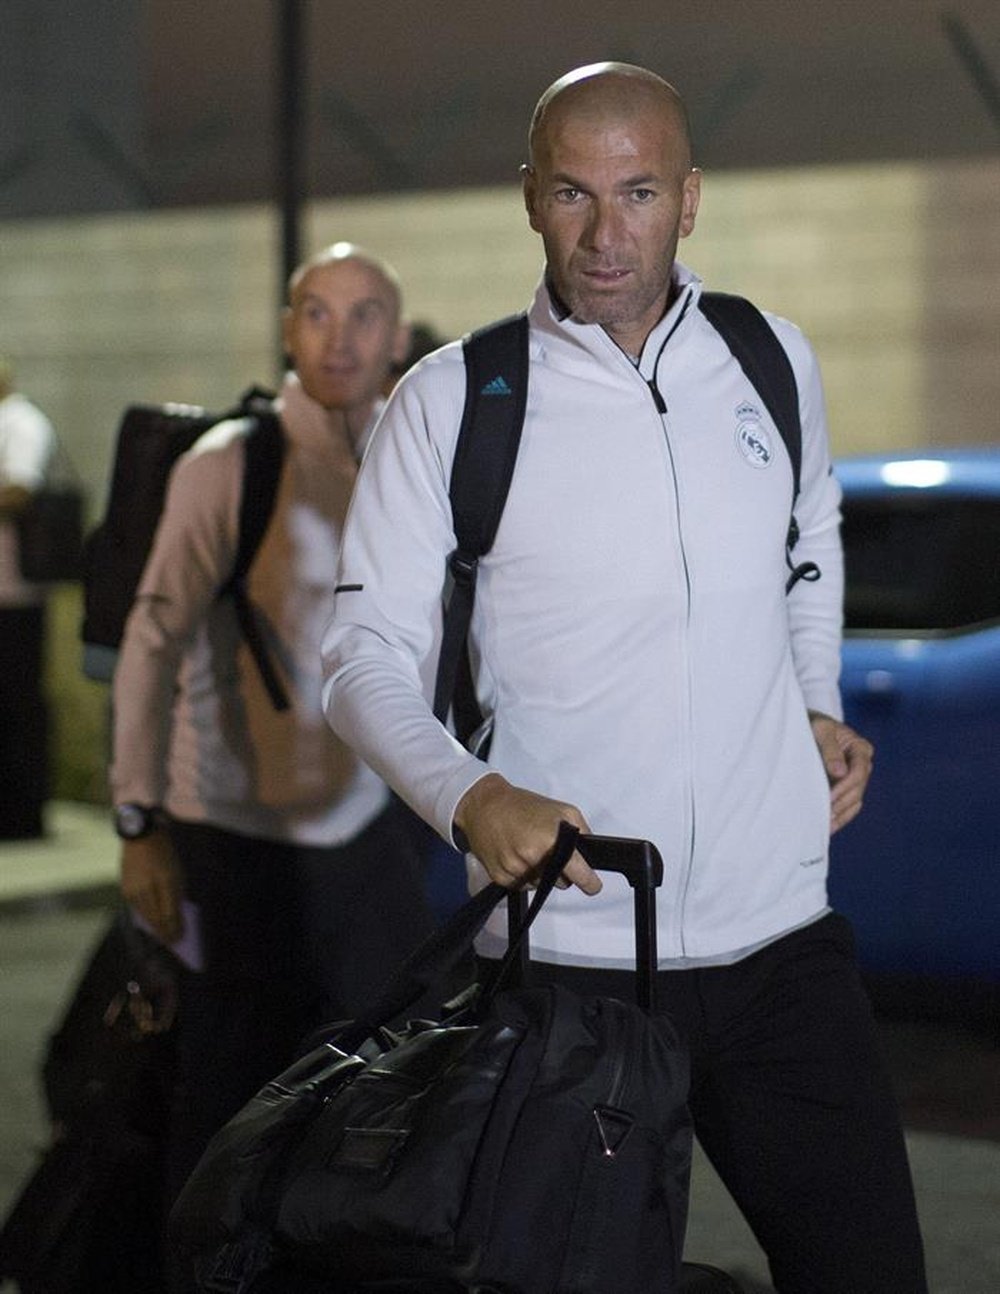 Zidane's side arrived in Los Angeles for the pre-season preparation. EFE